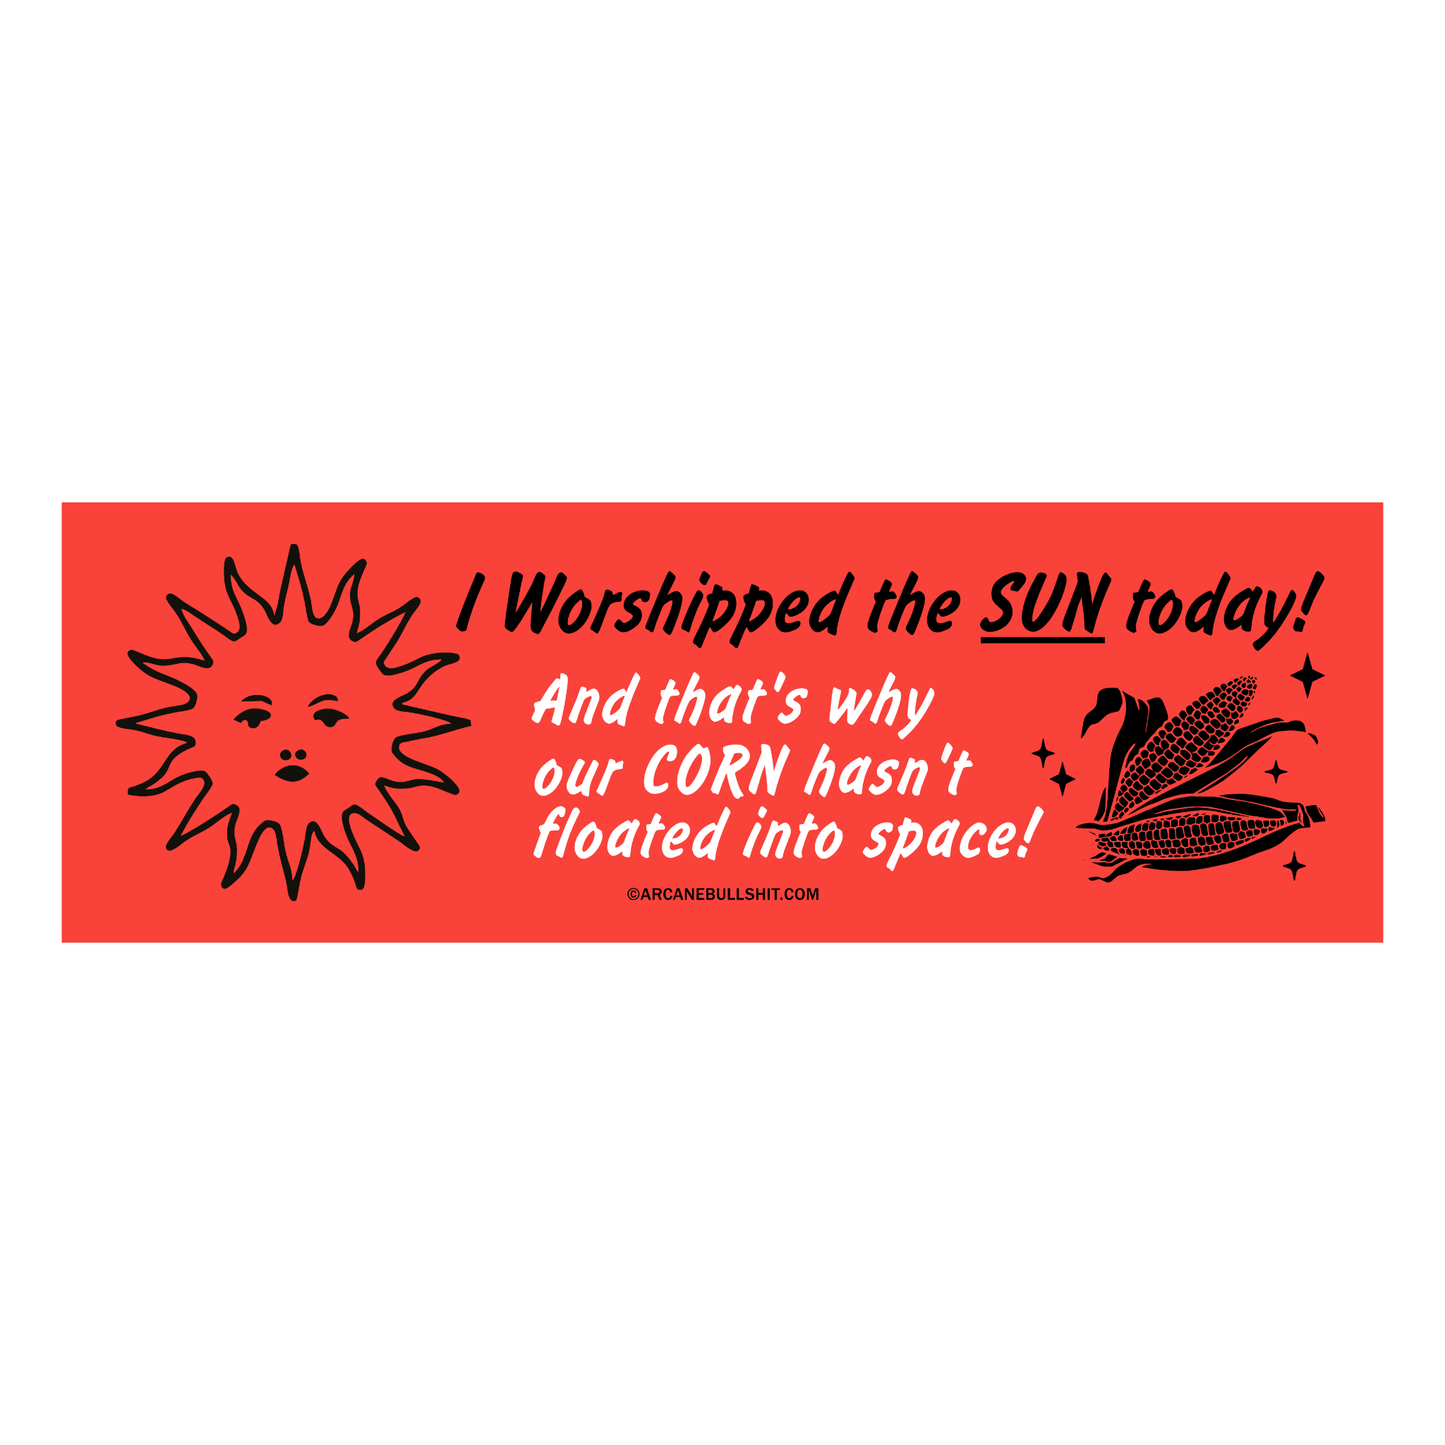 Cosmic overlords bumper stickers